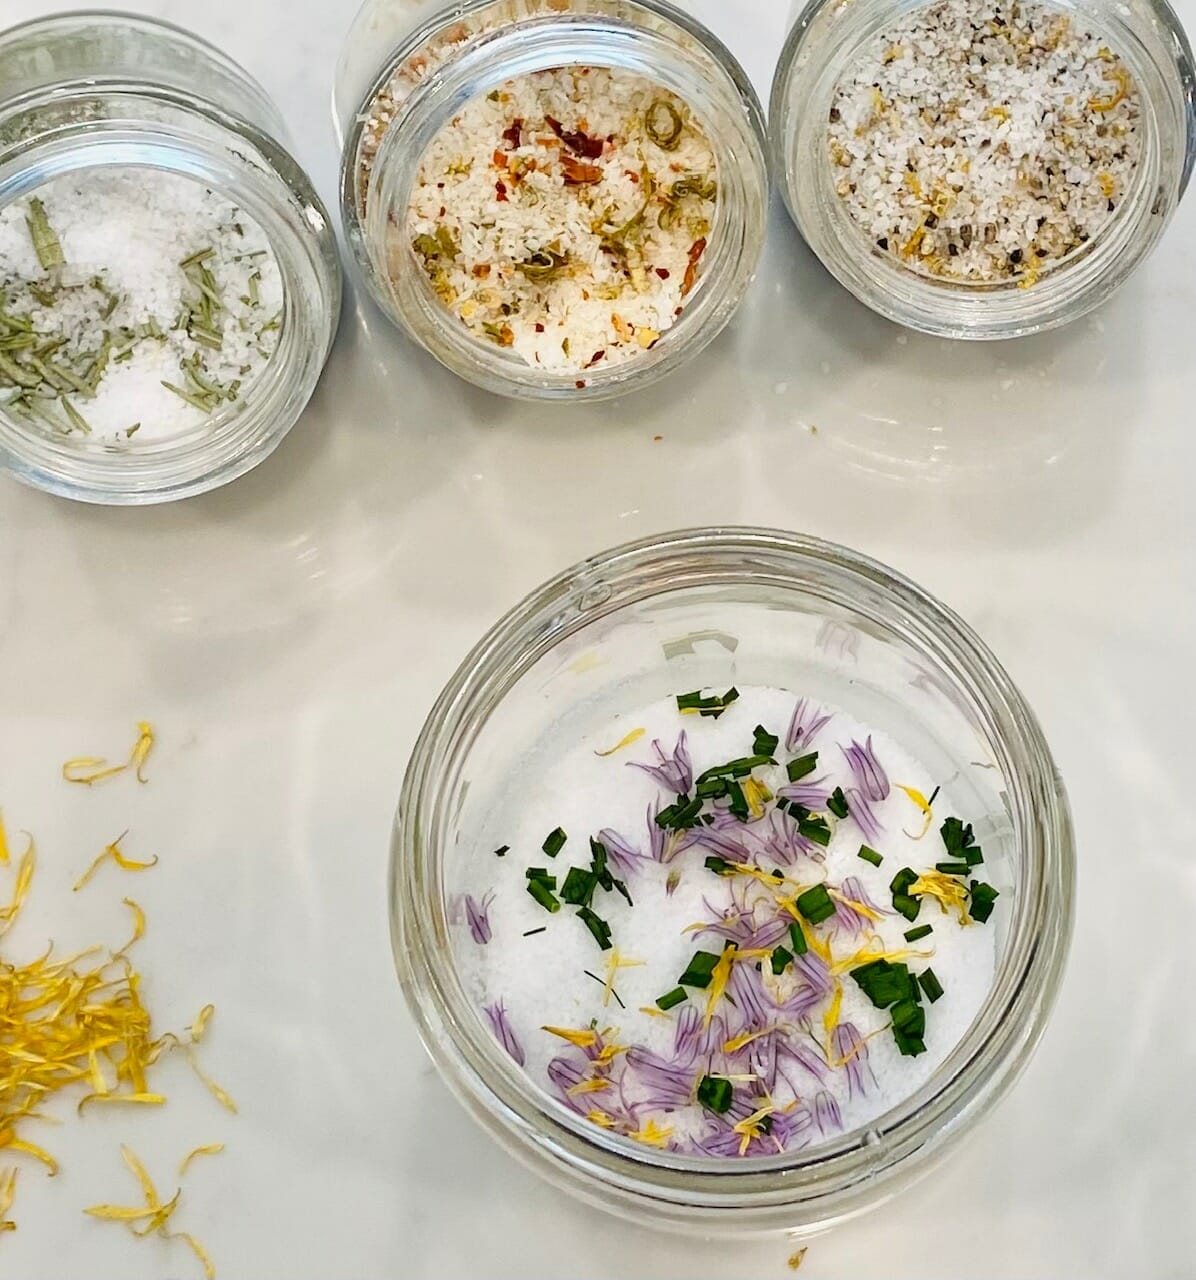 Image of how to make finishing salt: jars open, herbs being added to fresh salt.